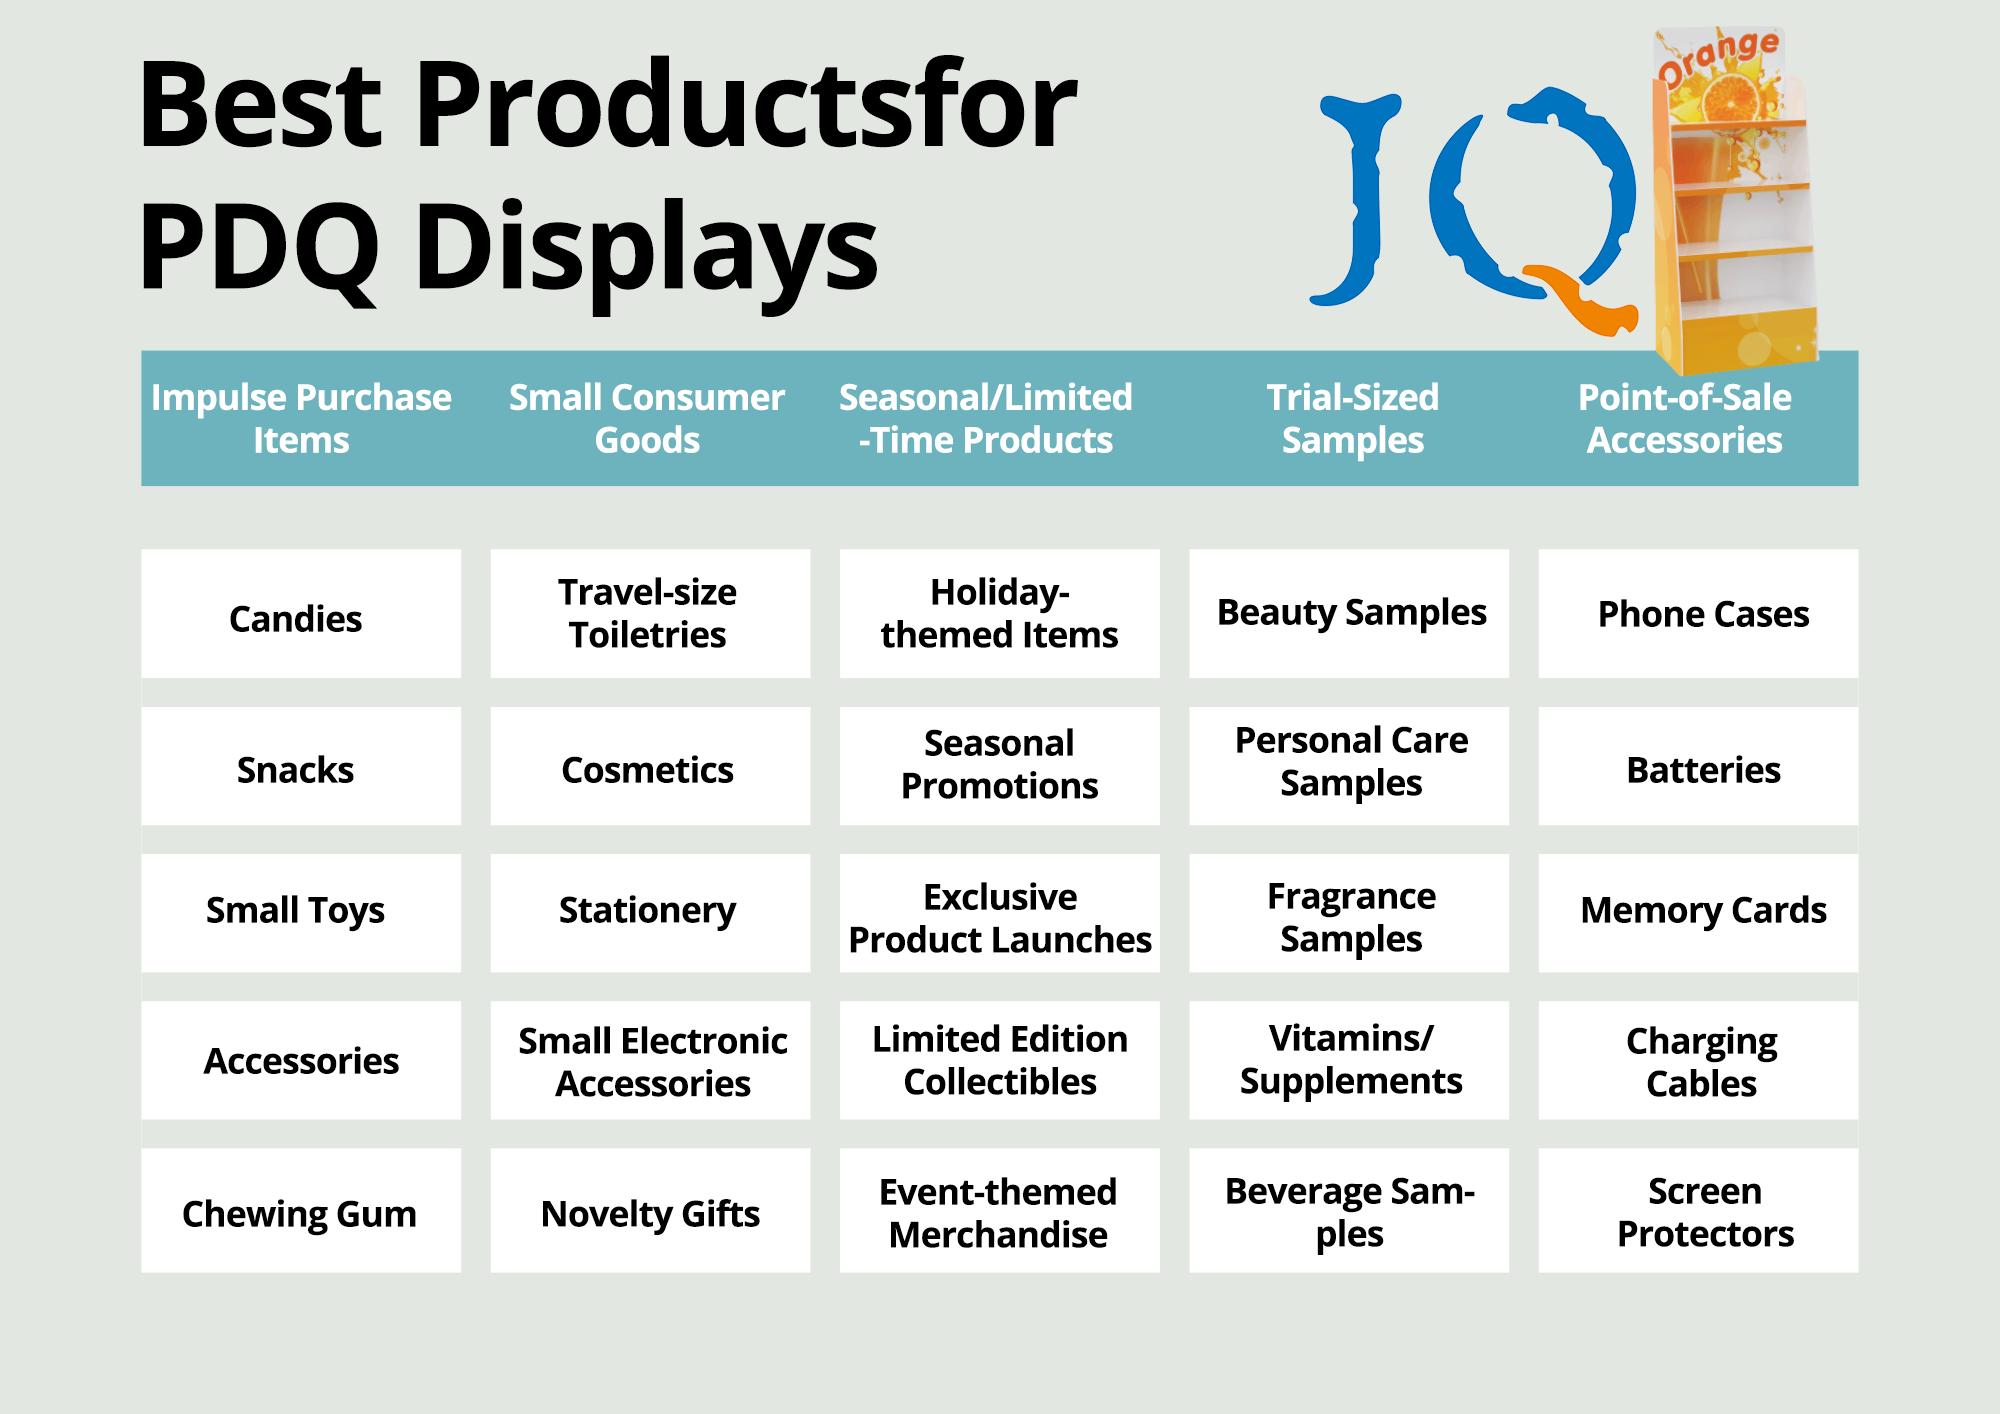 Which products are suitable for PDQ Displays